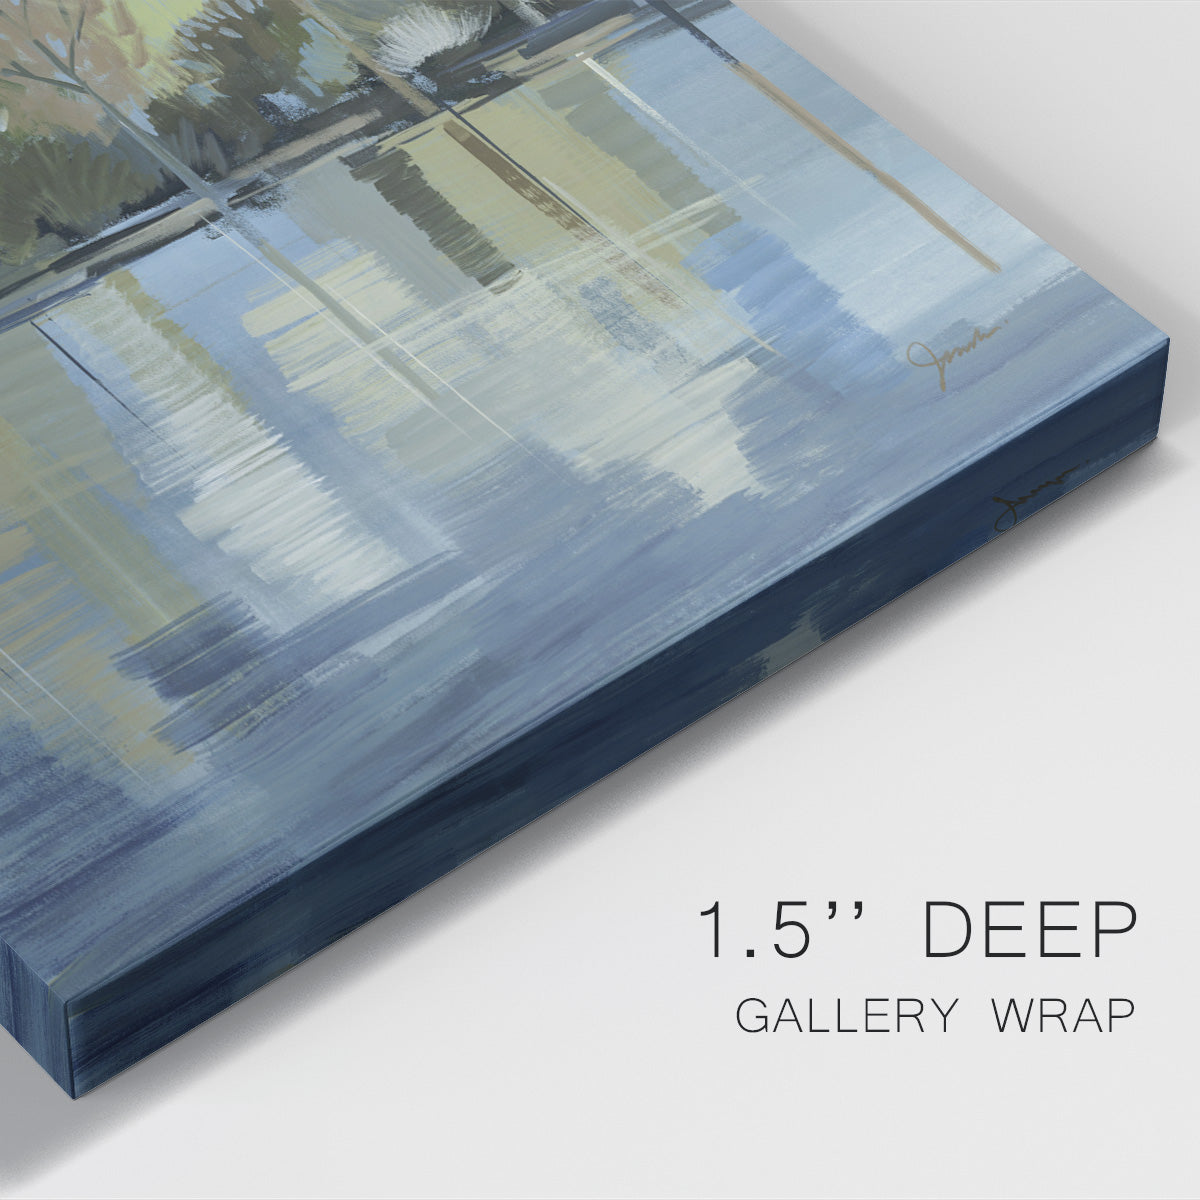 Enchanted Forest I Premium Gallery Wrapped Canvas - Ready to Hang